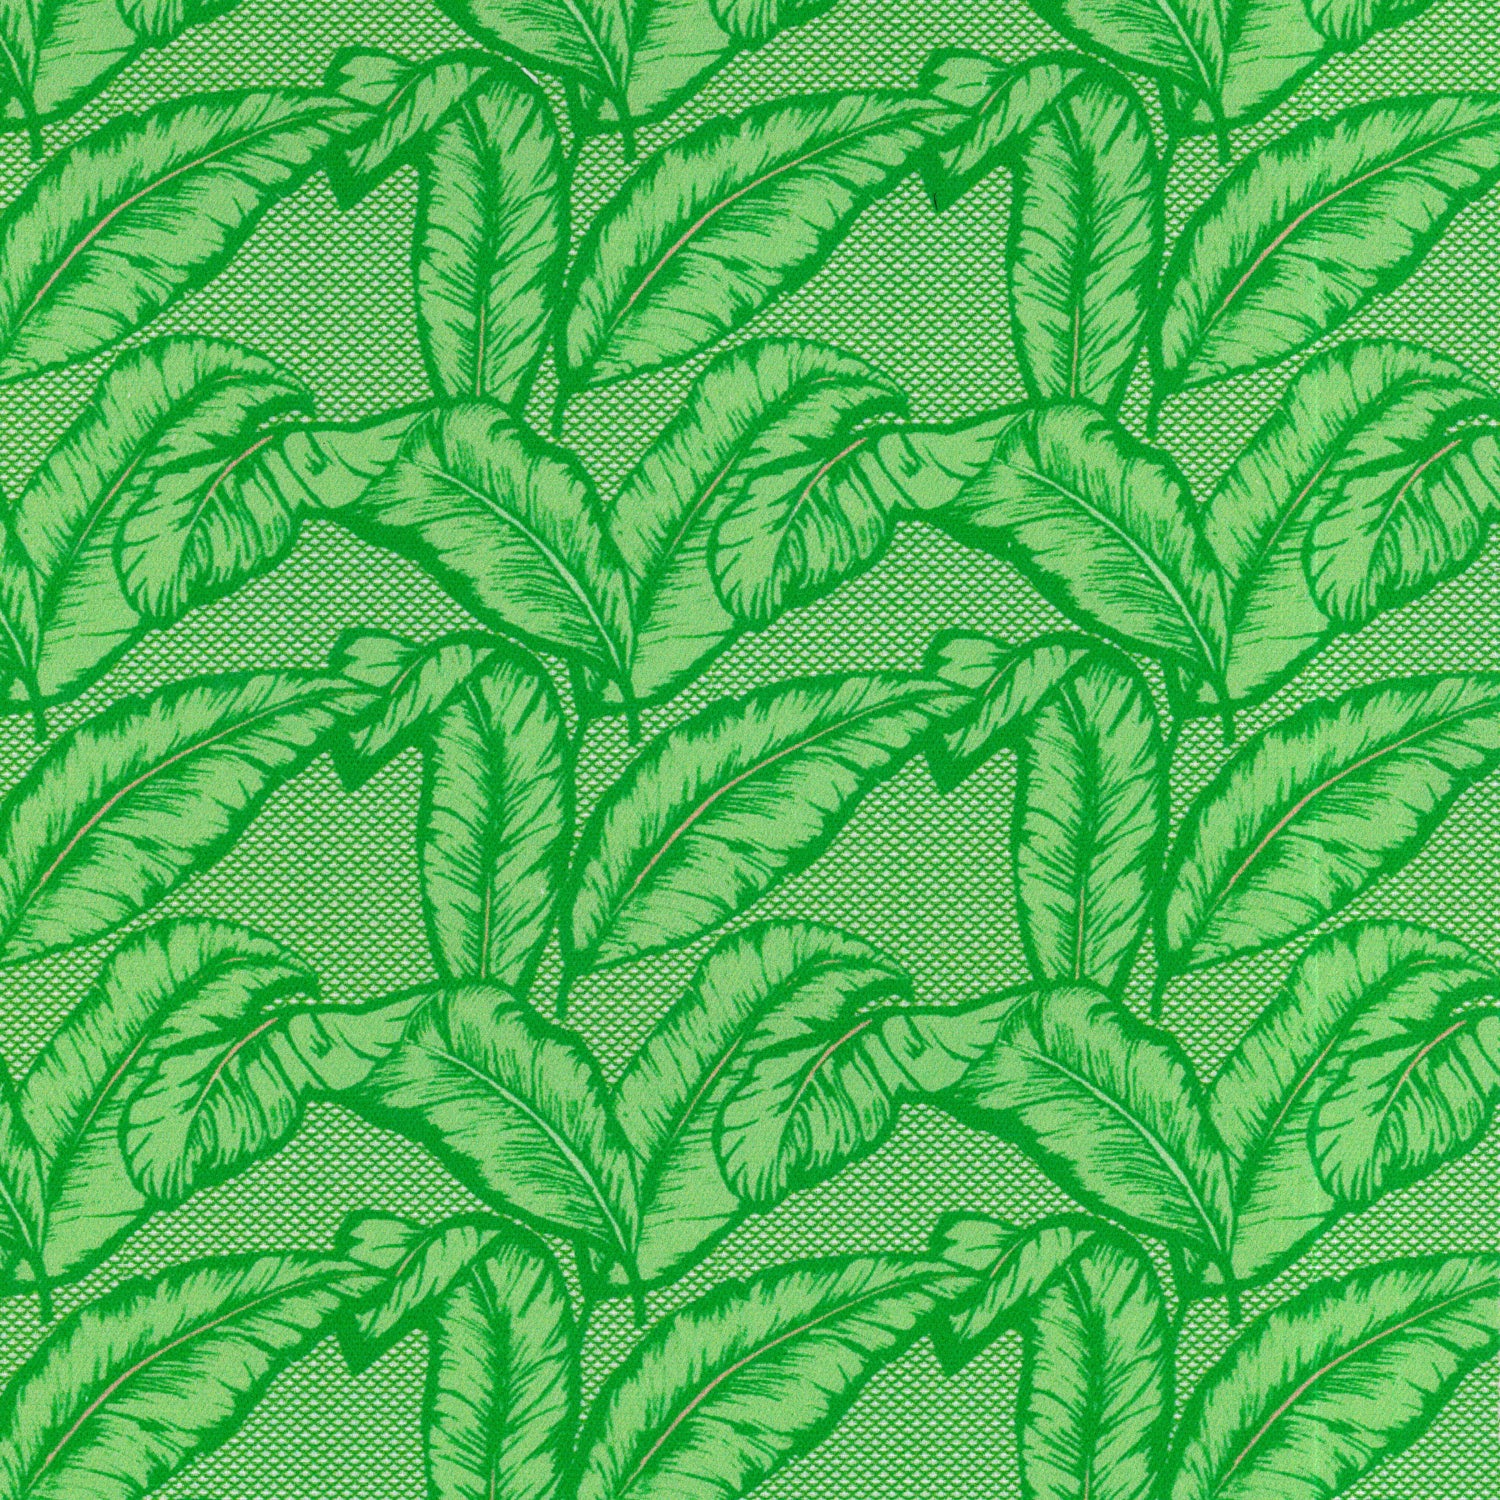 Detail of fabric in a dense leaf print in shades of green on a green field.